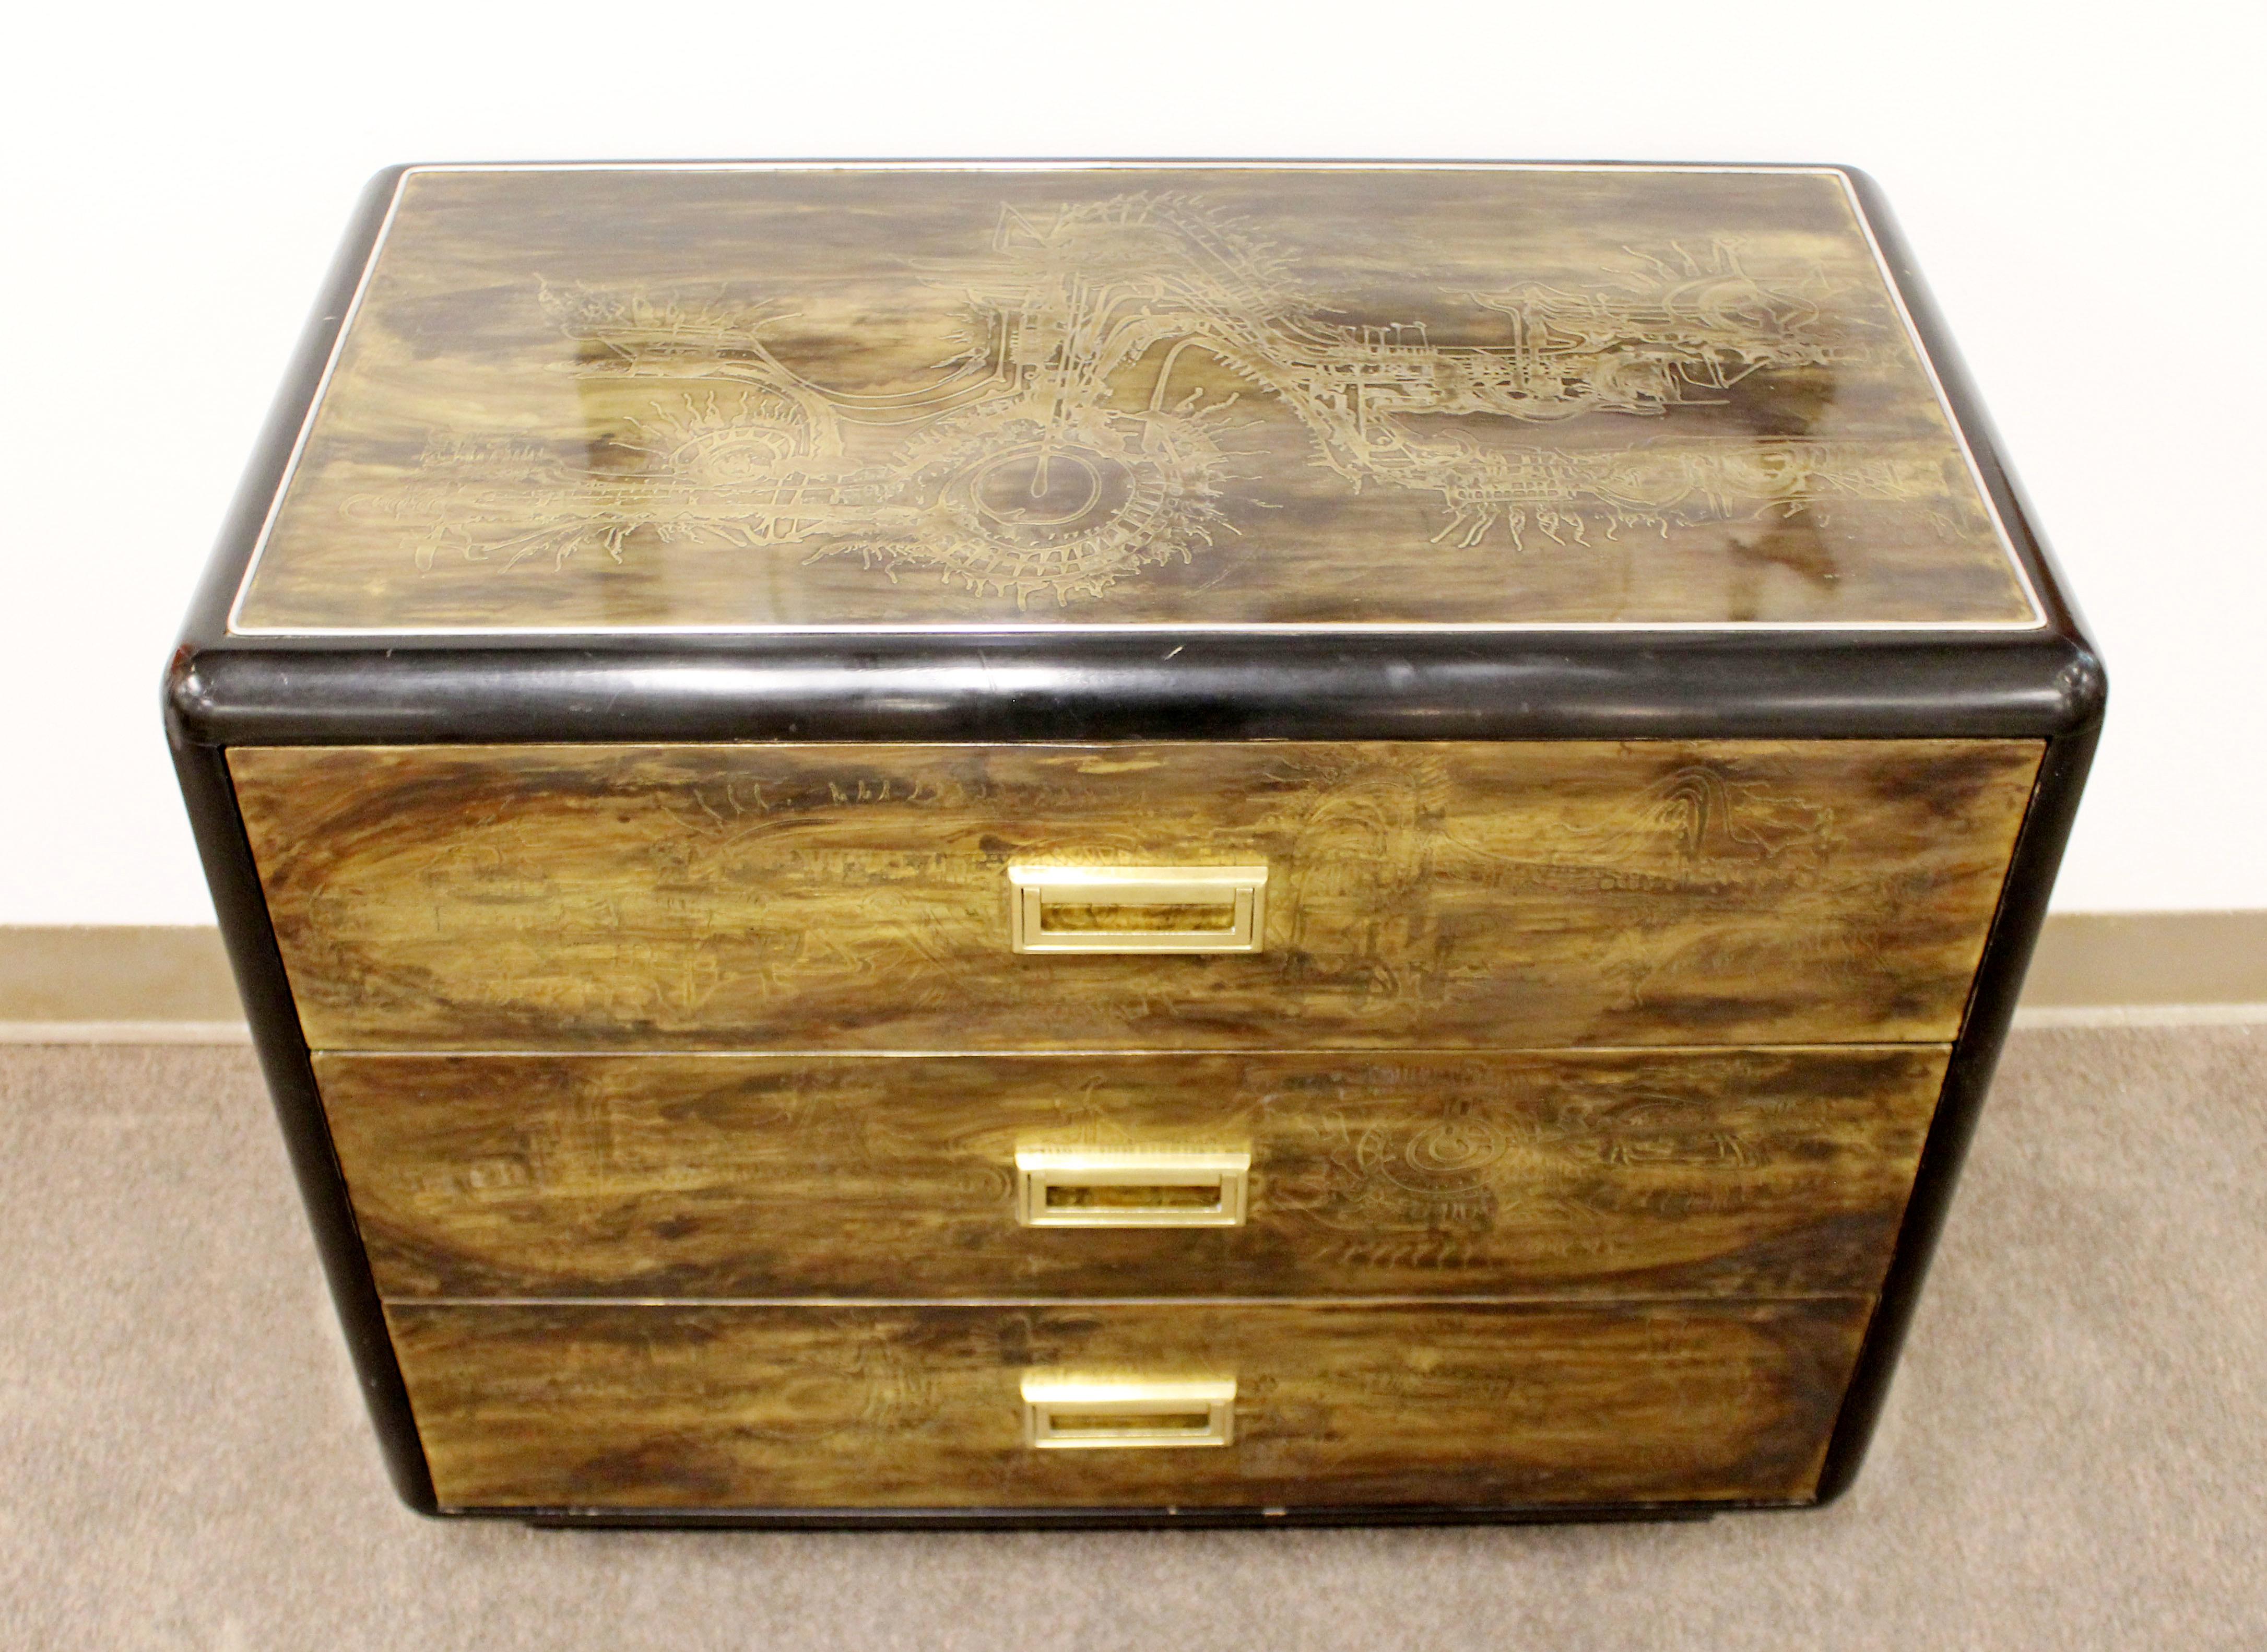 For your consideration is a phenomenal, acid etched chest or cabinet of drawers, with a gold chinoiserie design, by Bernard Rohne for Mastercraft, circa early 1970s. In excellent vintage condition. The dimensions are 31